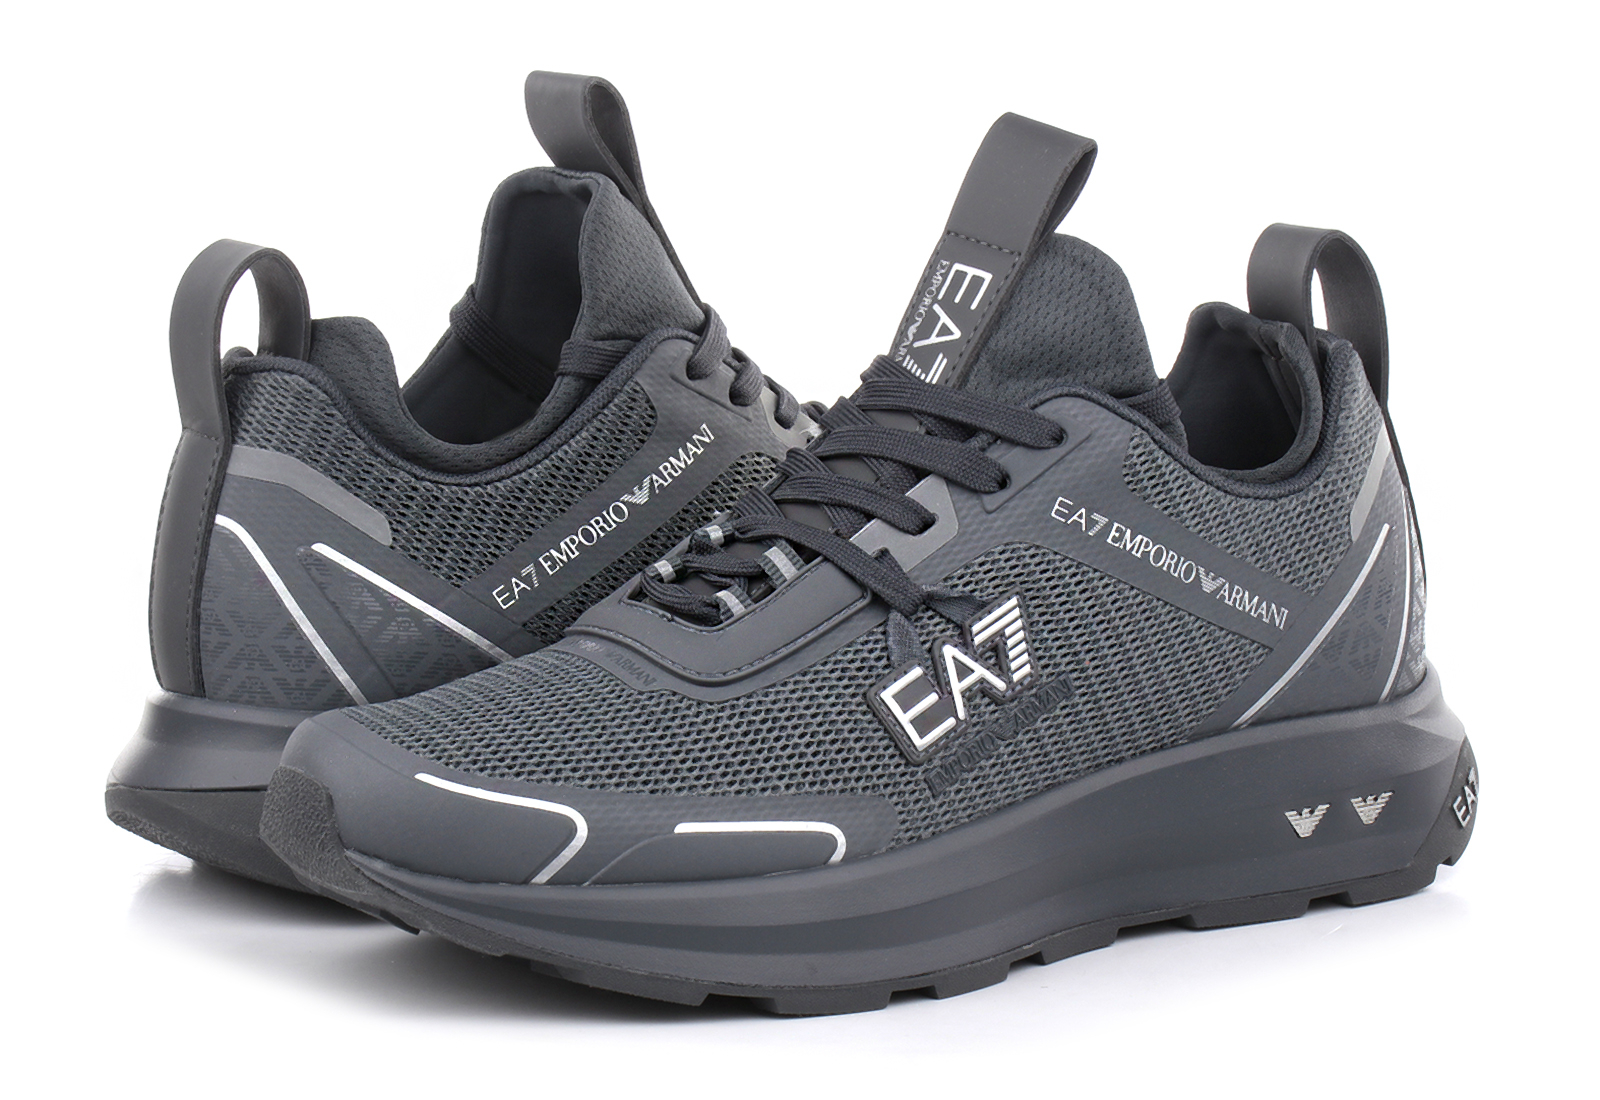 EA7 Emporio Armani Sneakers - Altura - X089-XK234-641 - Online shop for  sneakers, shoes and boots